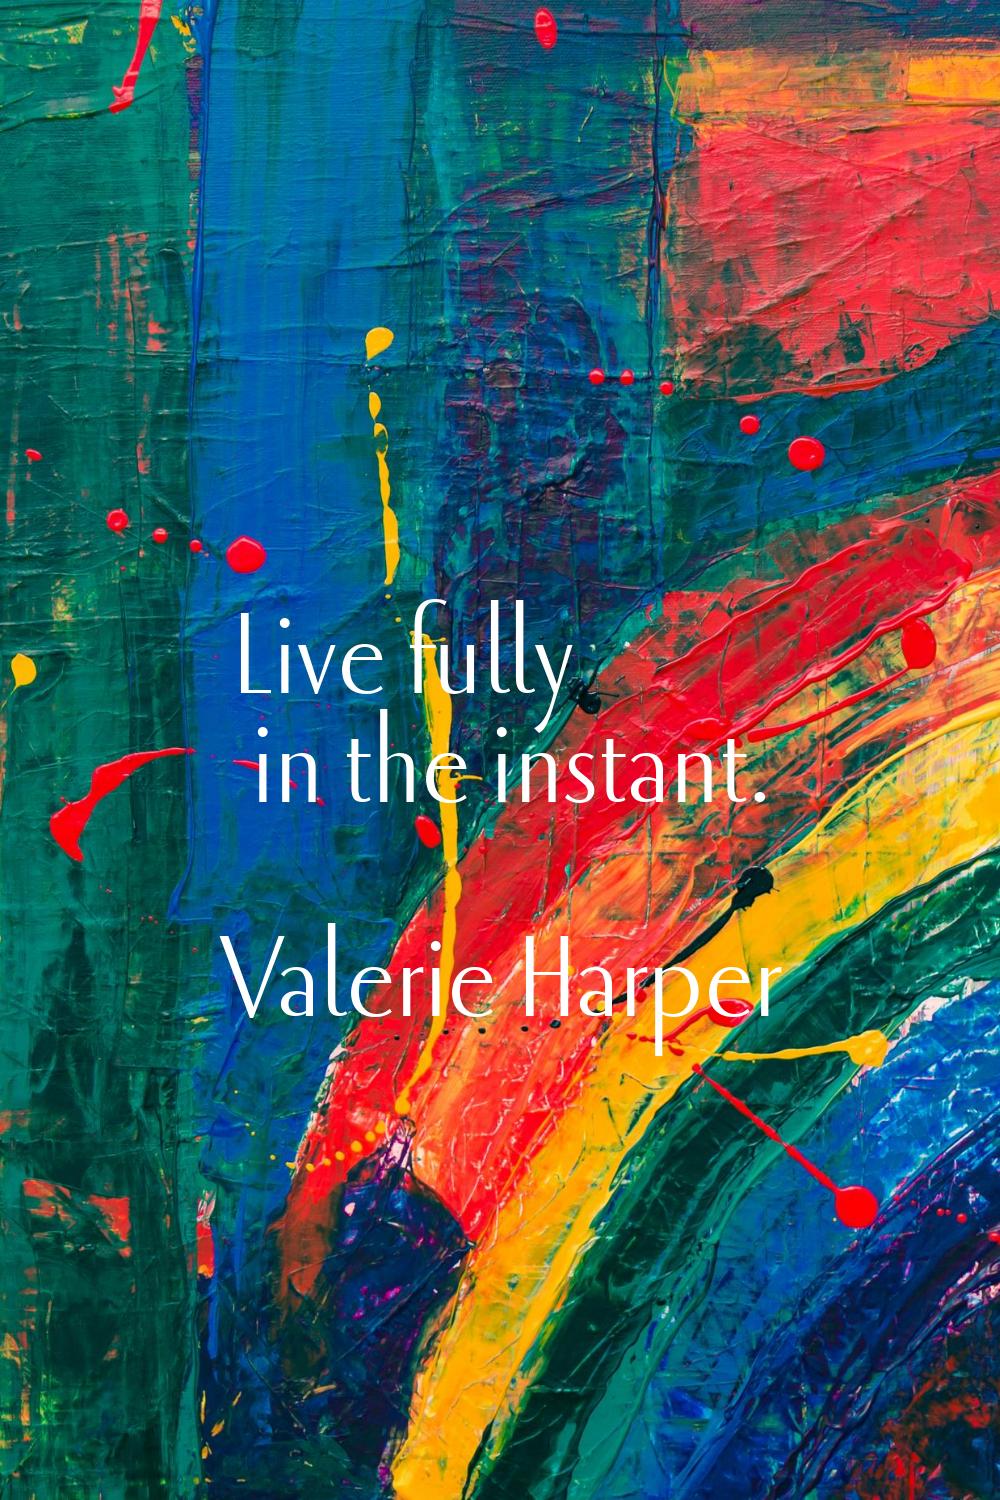 Live fully in the instant.